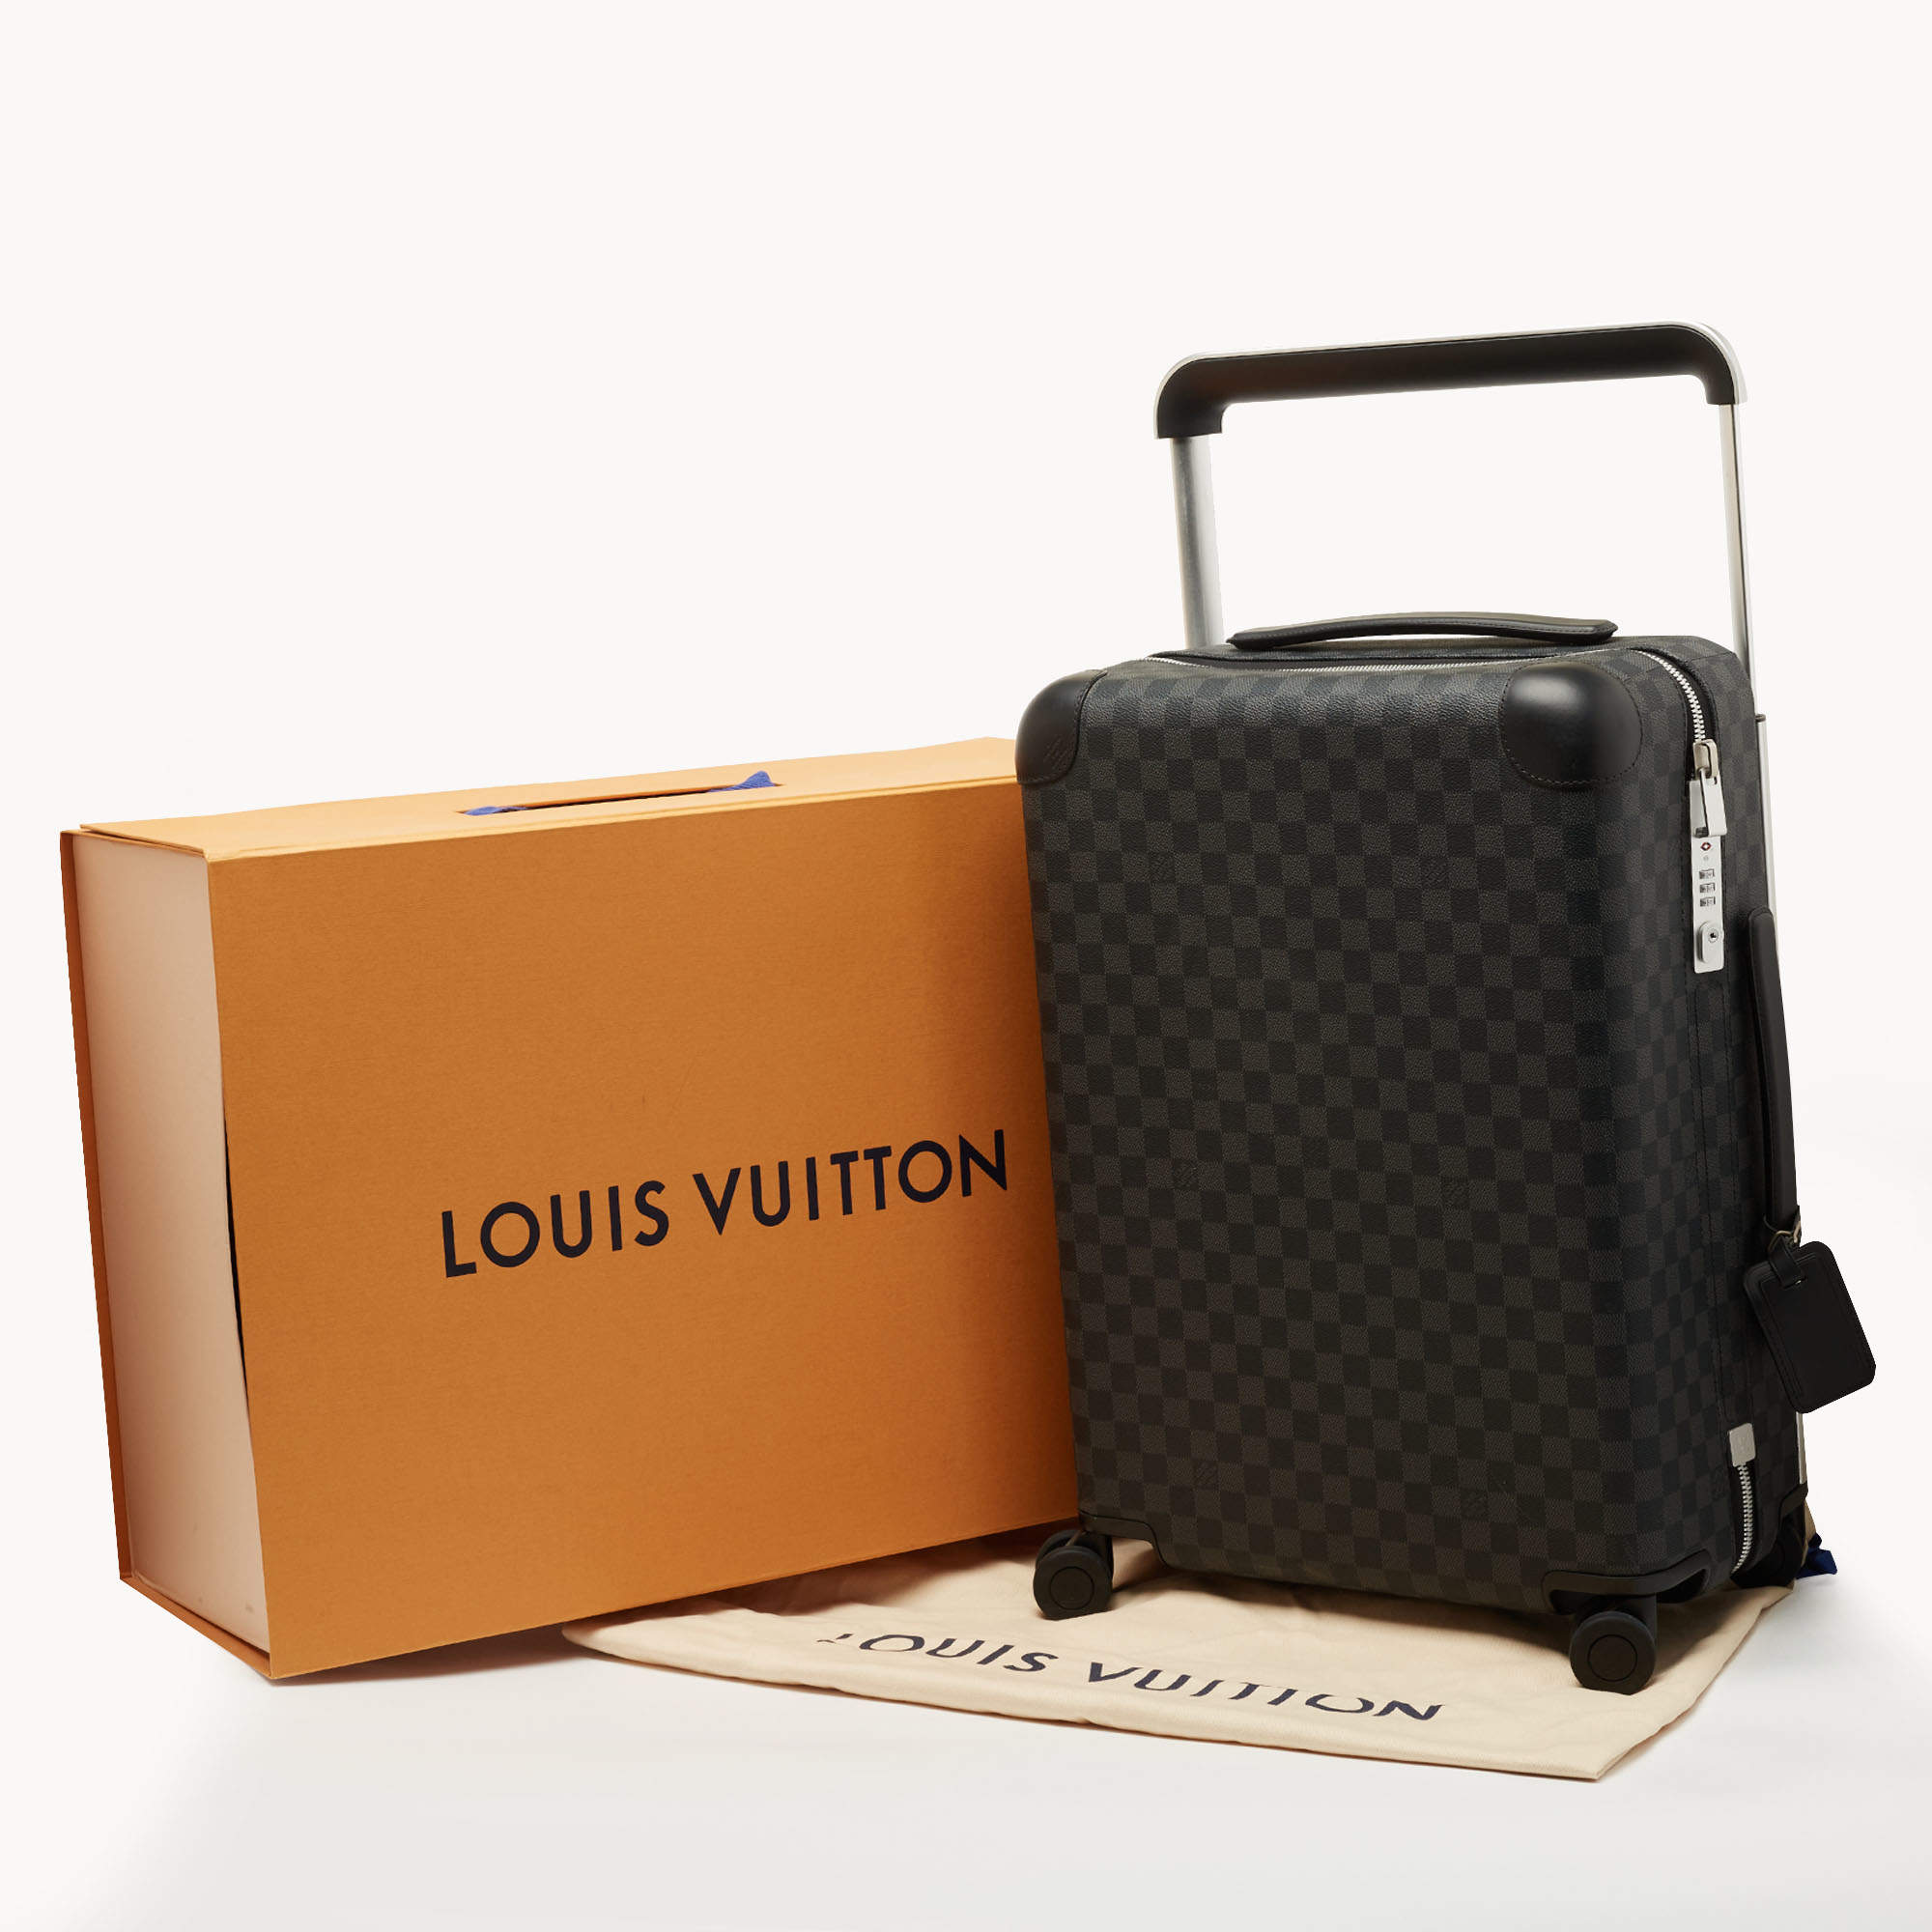 The New Innovative Rolling Luggage By Louis Vuitton Featuring